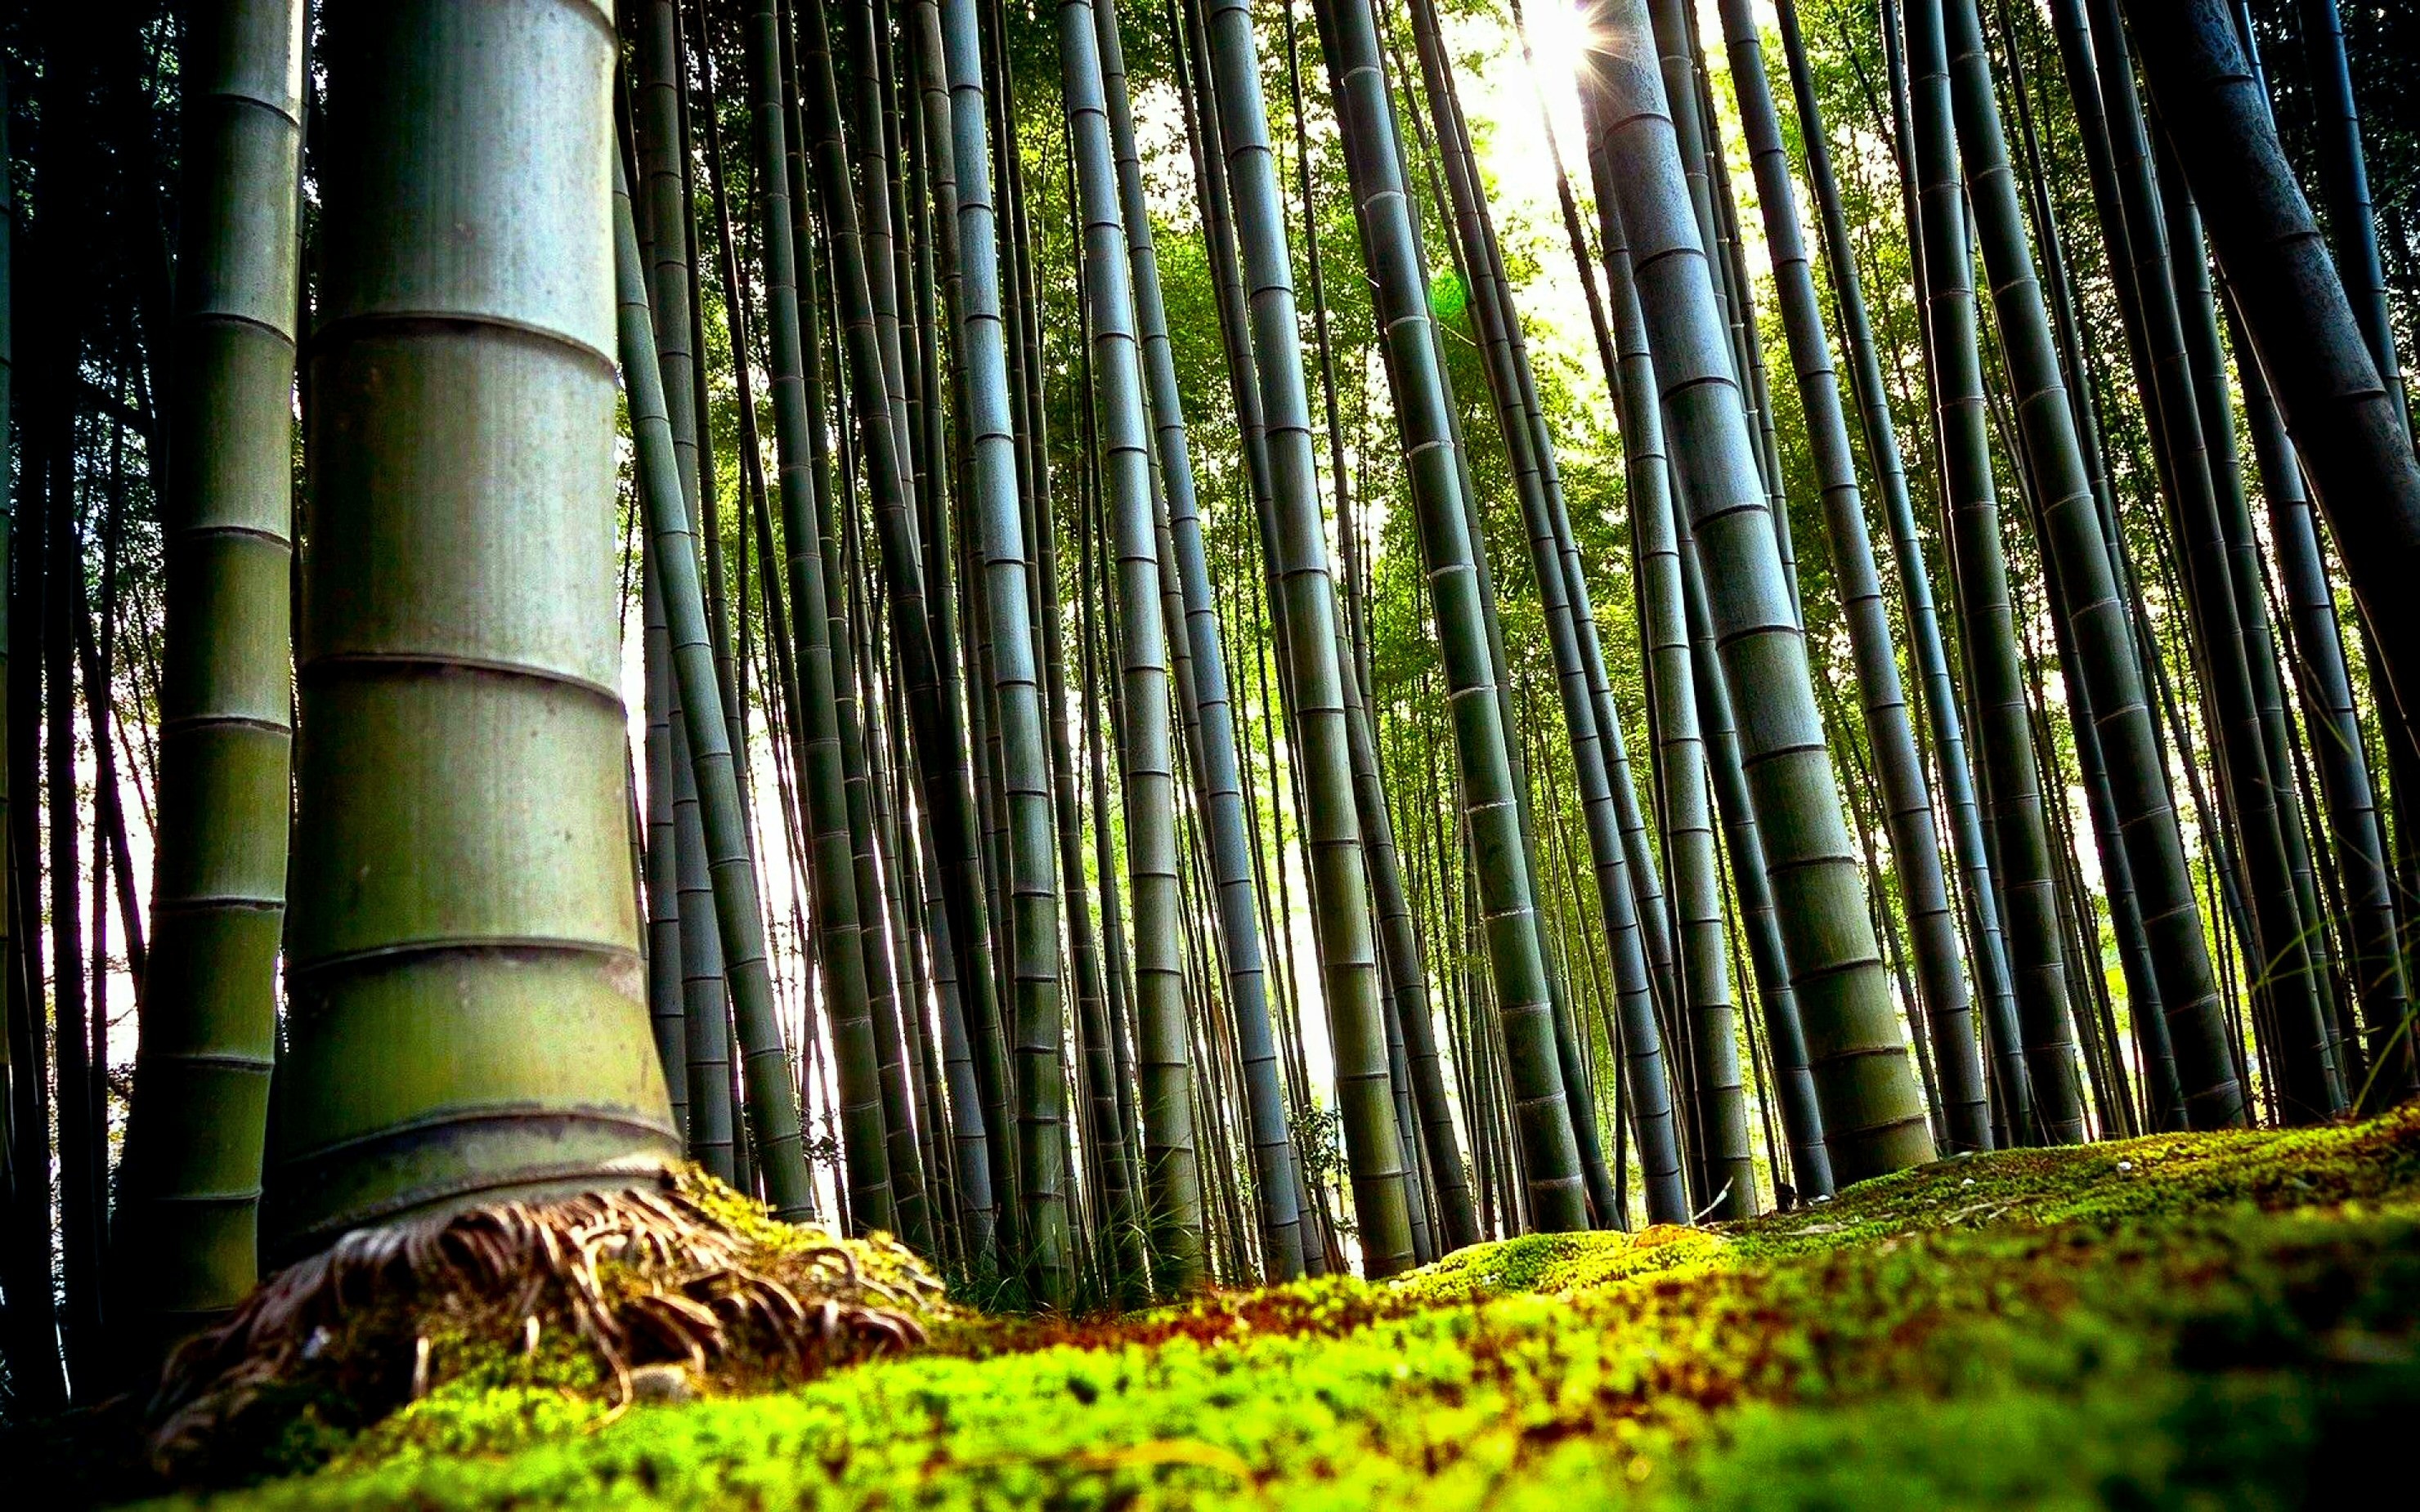 Bamboo: The plant that is growing mainly in the tropical and subtropical regions of Asia. 2960x1850 HD Wallpaper.